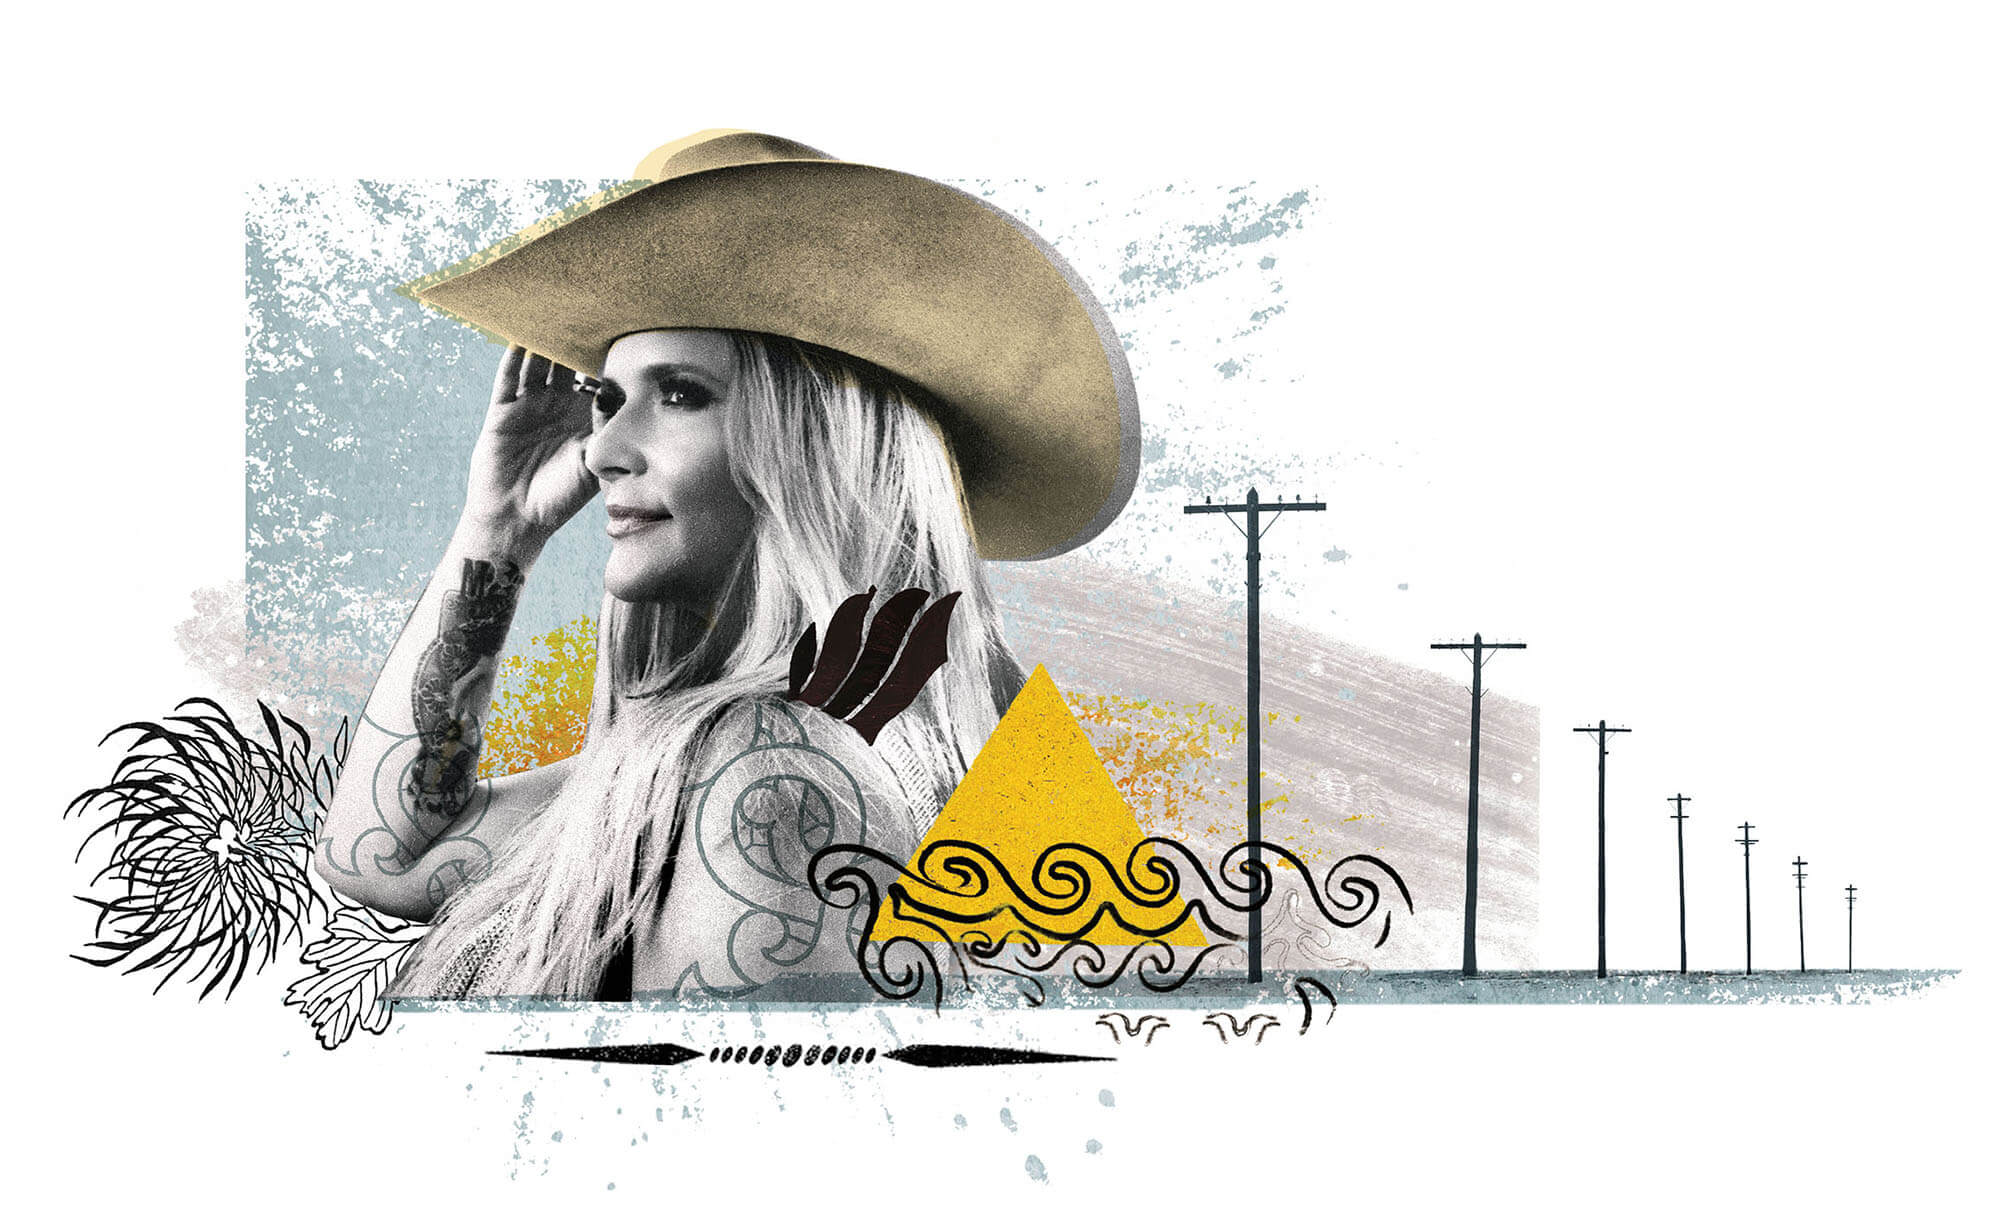 An illustration of a woman with short blonde hair and a cowboy hat in front of a desert landscape with tumbleweeds and powerlines